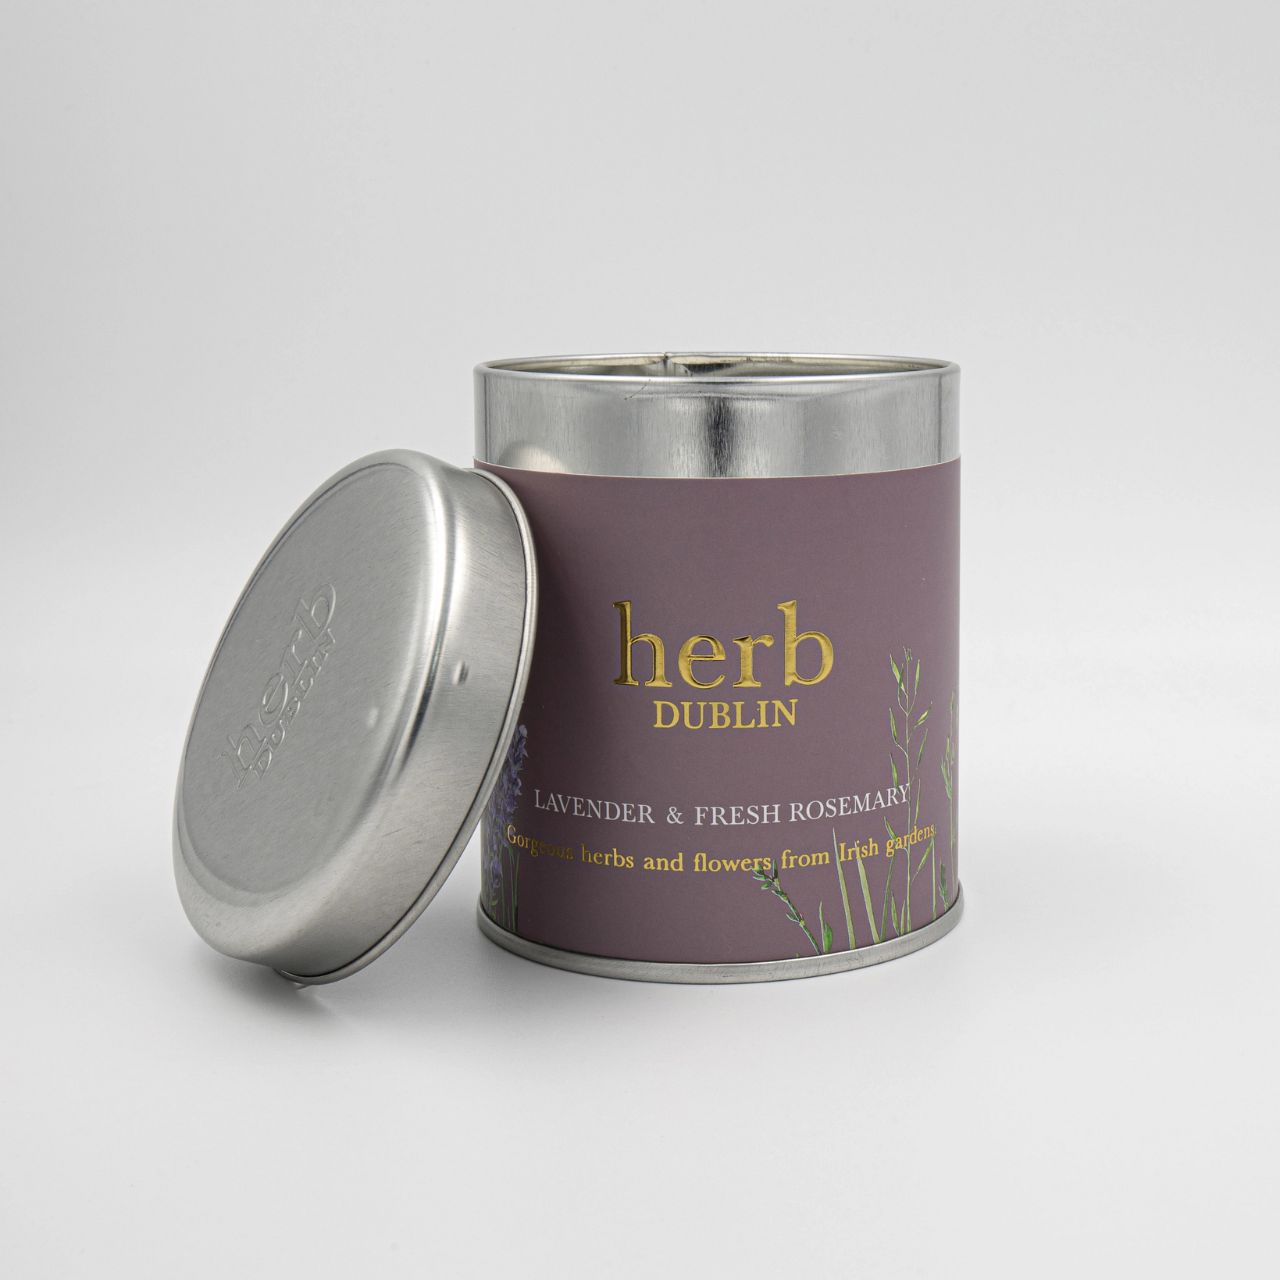 The Herb Dublin brand from Ireland offers a selection of essential oils, fragrances, bath salts, and candles that promote relaxation, detoxification, and overall well-being. By harnessing the healing properties of plants, they aid in improving both physical and mental health.